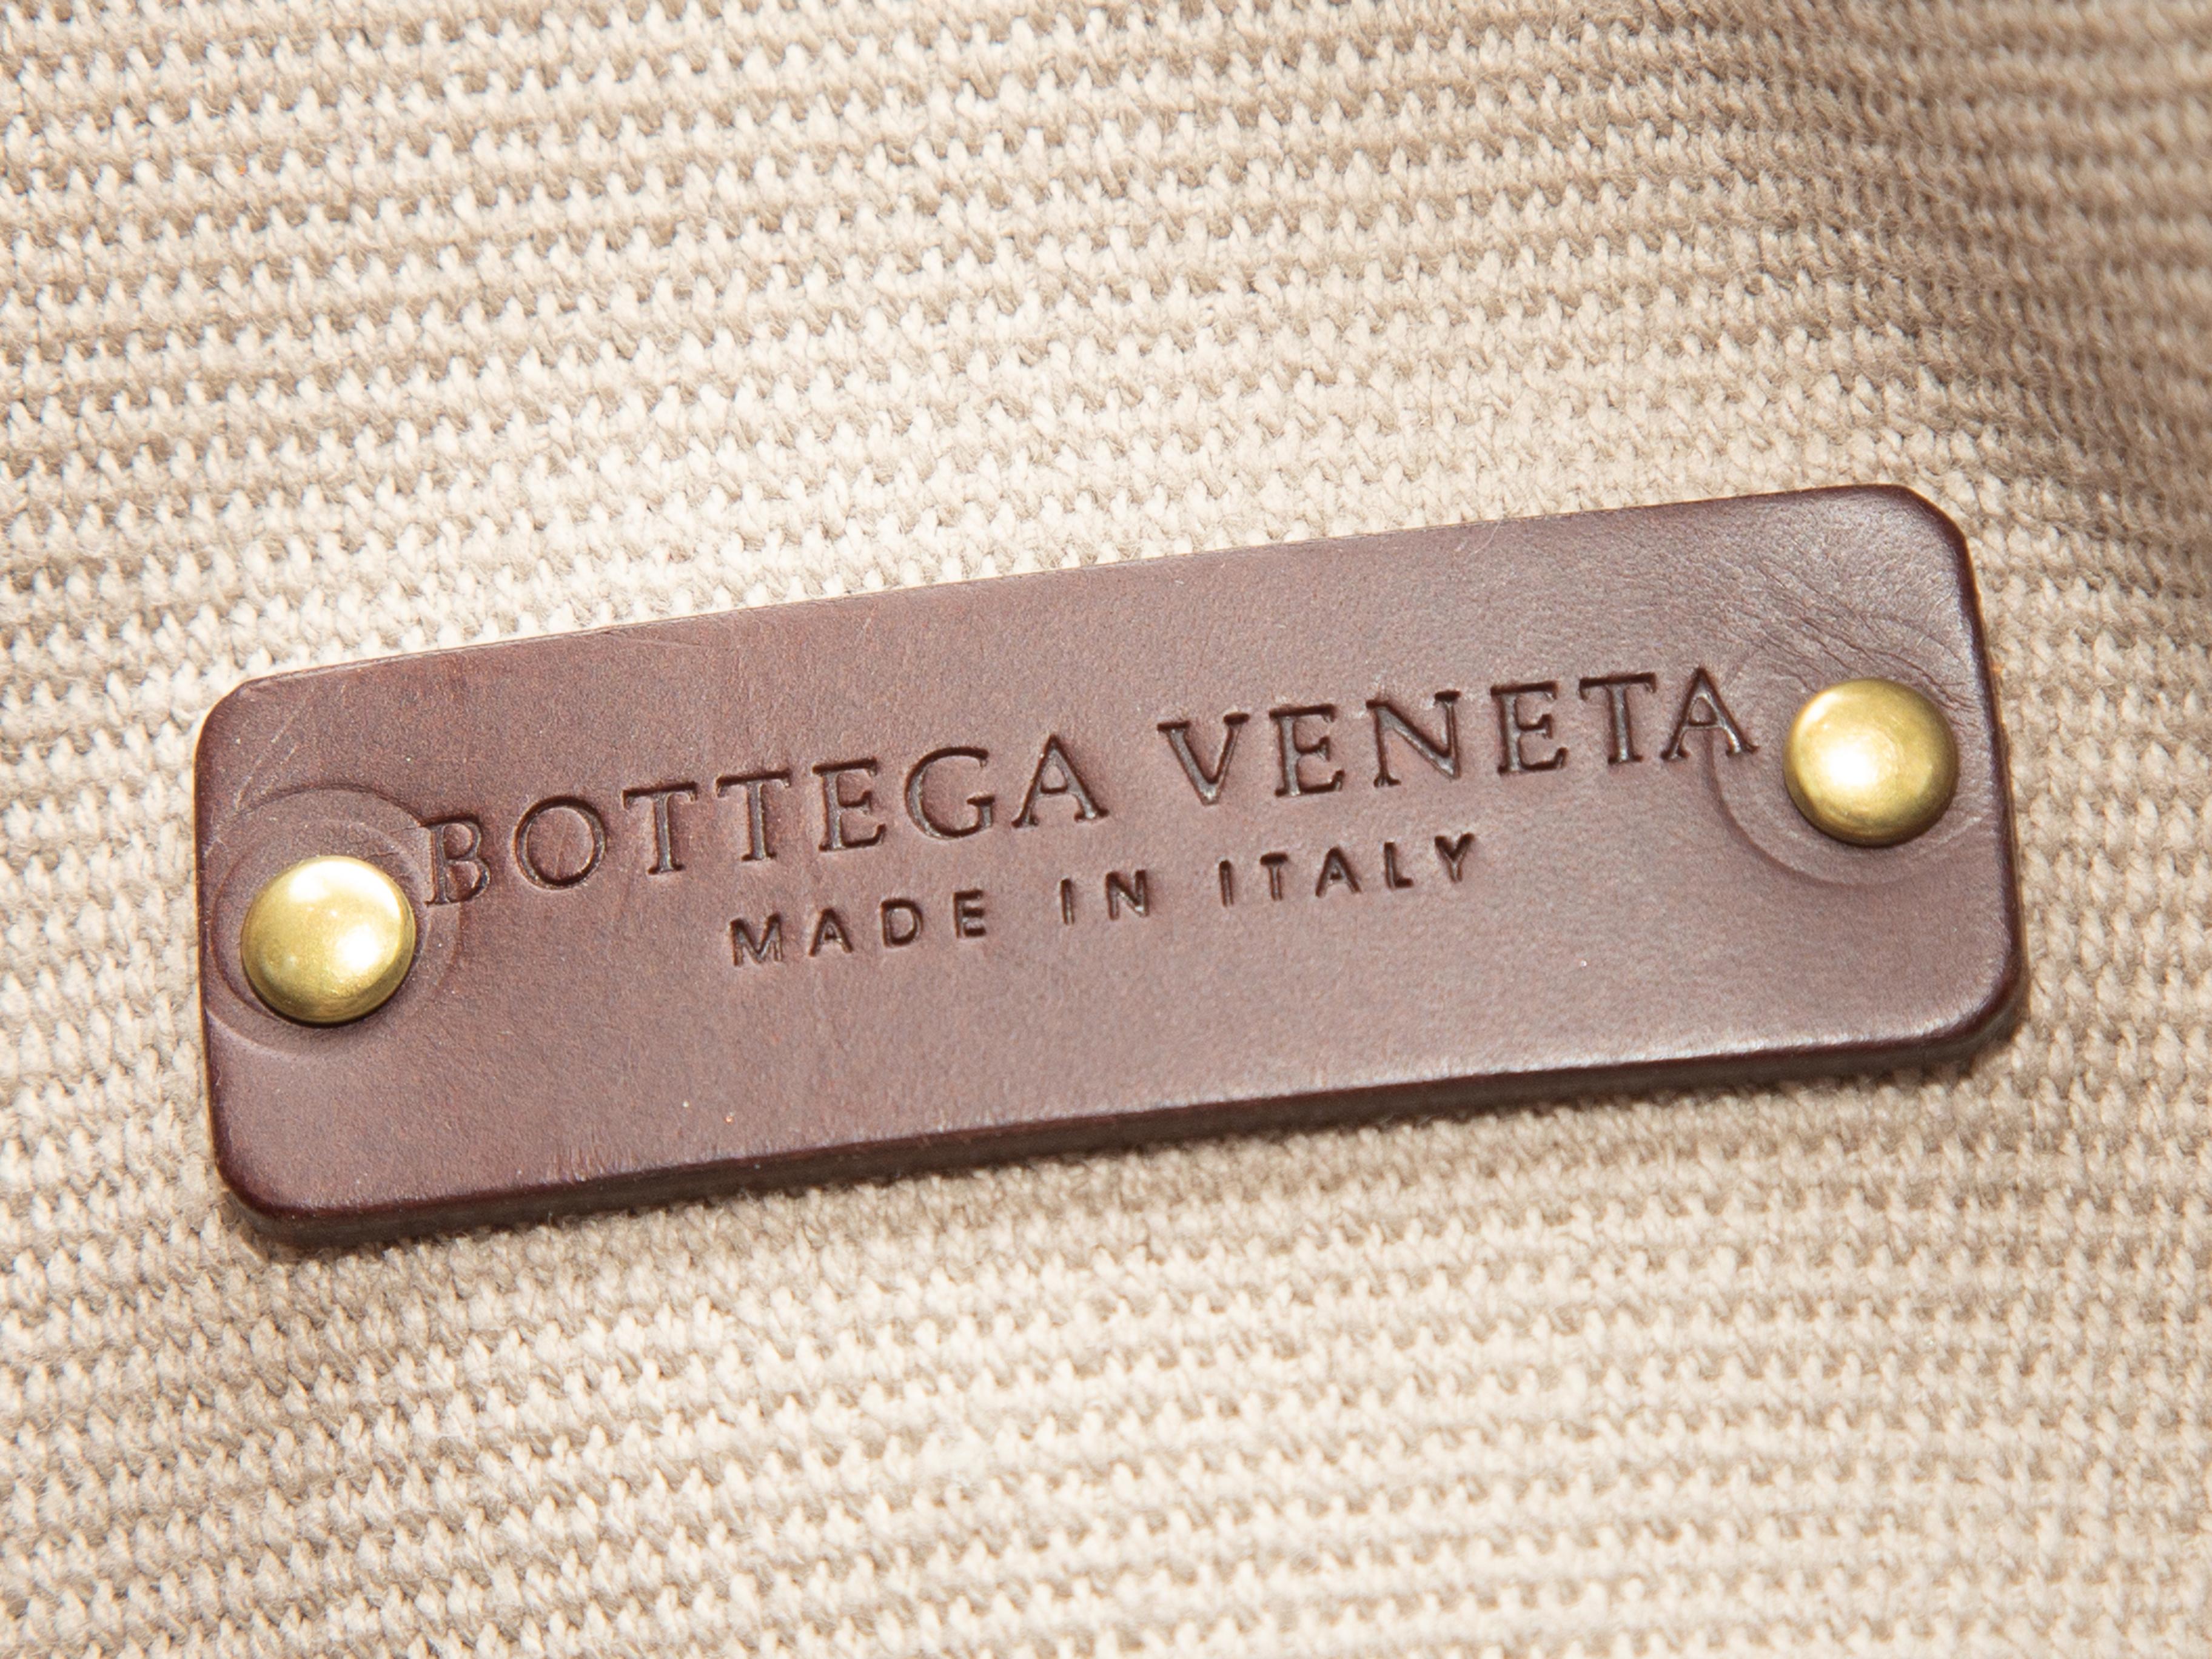 Product Details: Tan Bottega Veneta Canvas Tote Bag. This tote bag features a canvas body, gold-tone hardware, and dual leather top handles. 19.5